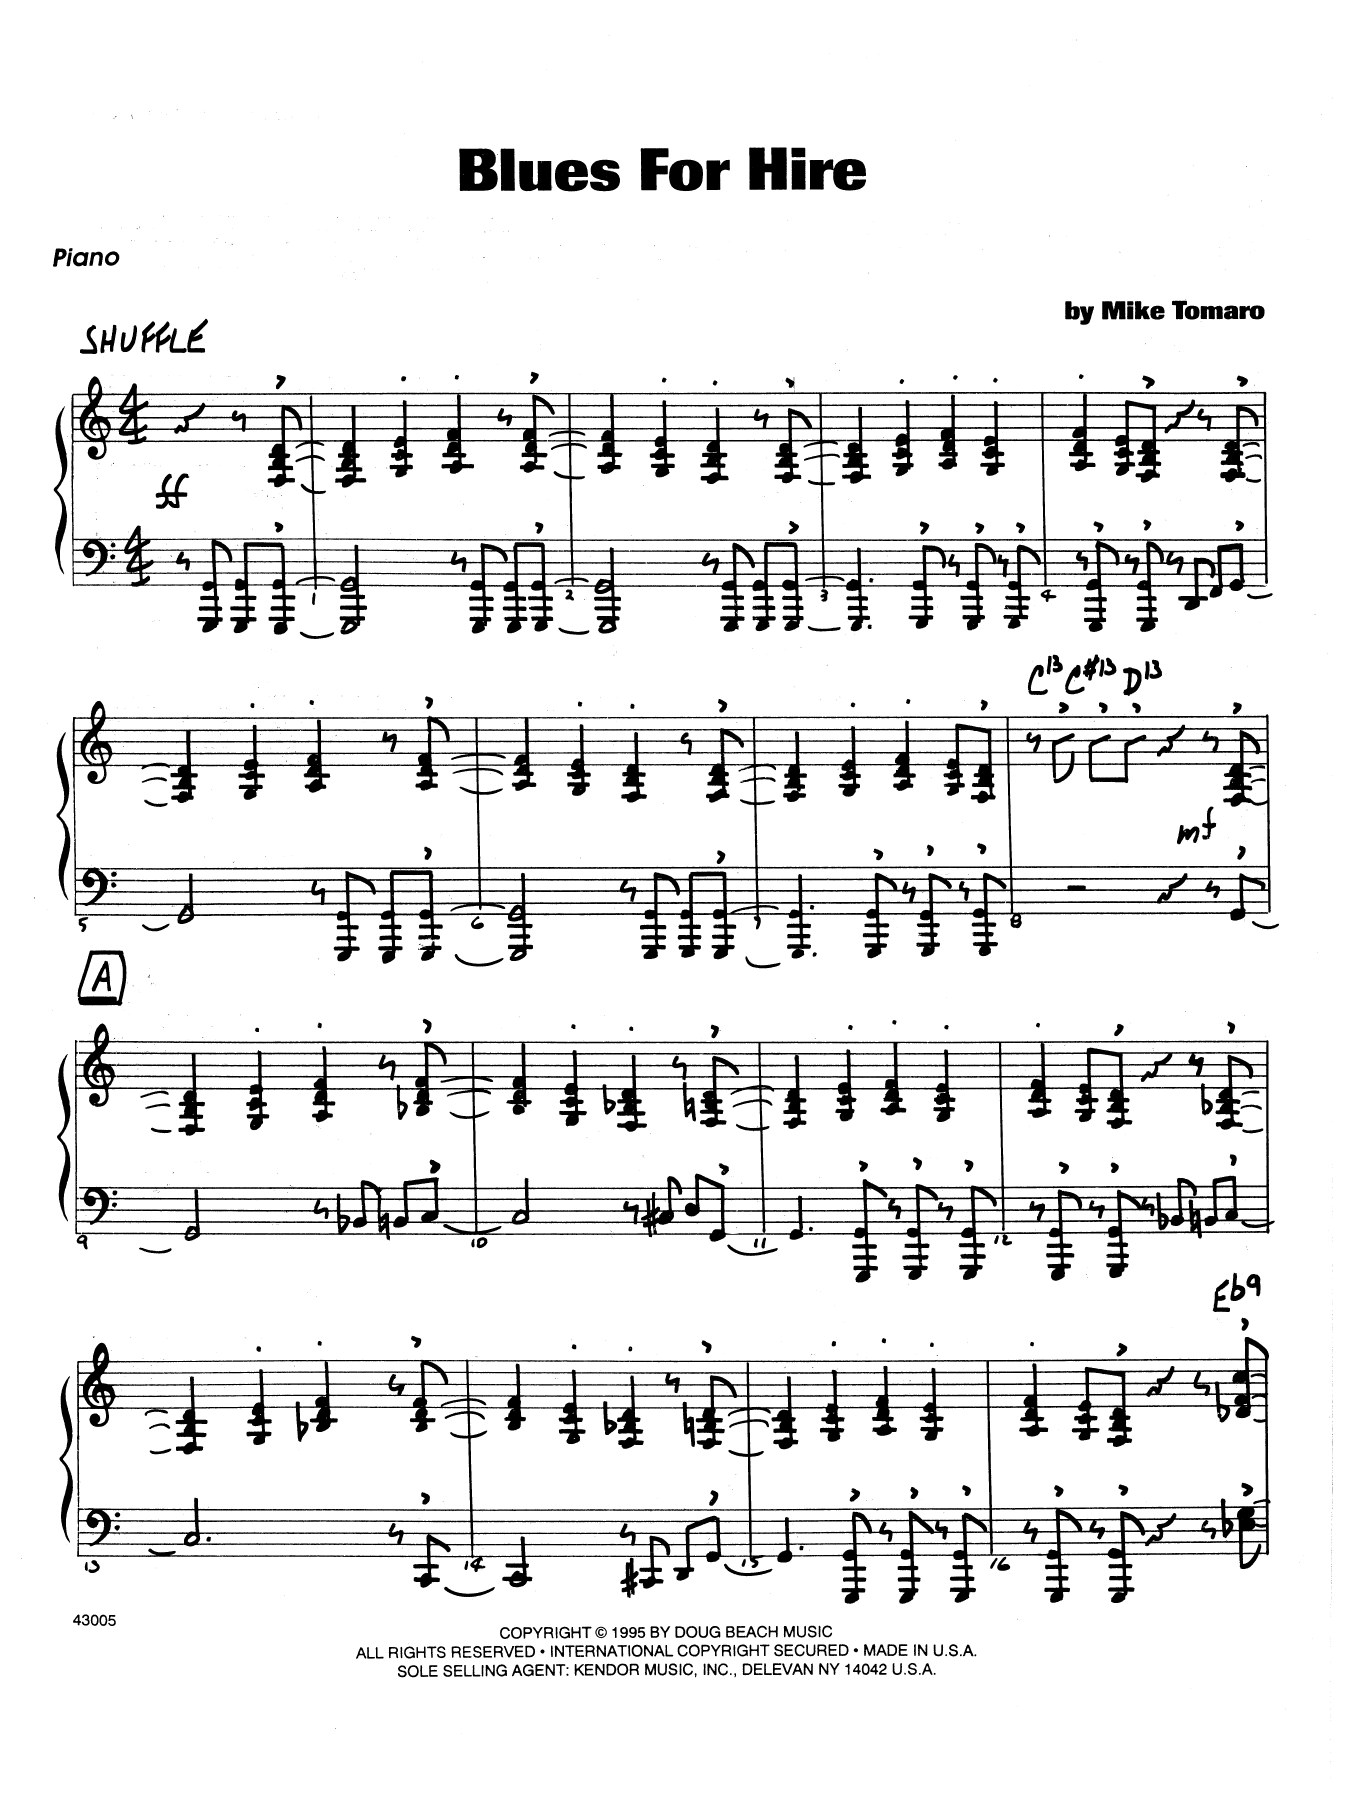 Download Mike Tomaro Blues For Hire - Piano Sheet Music